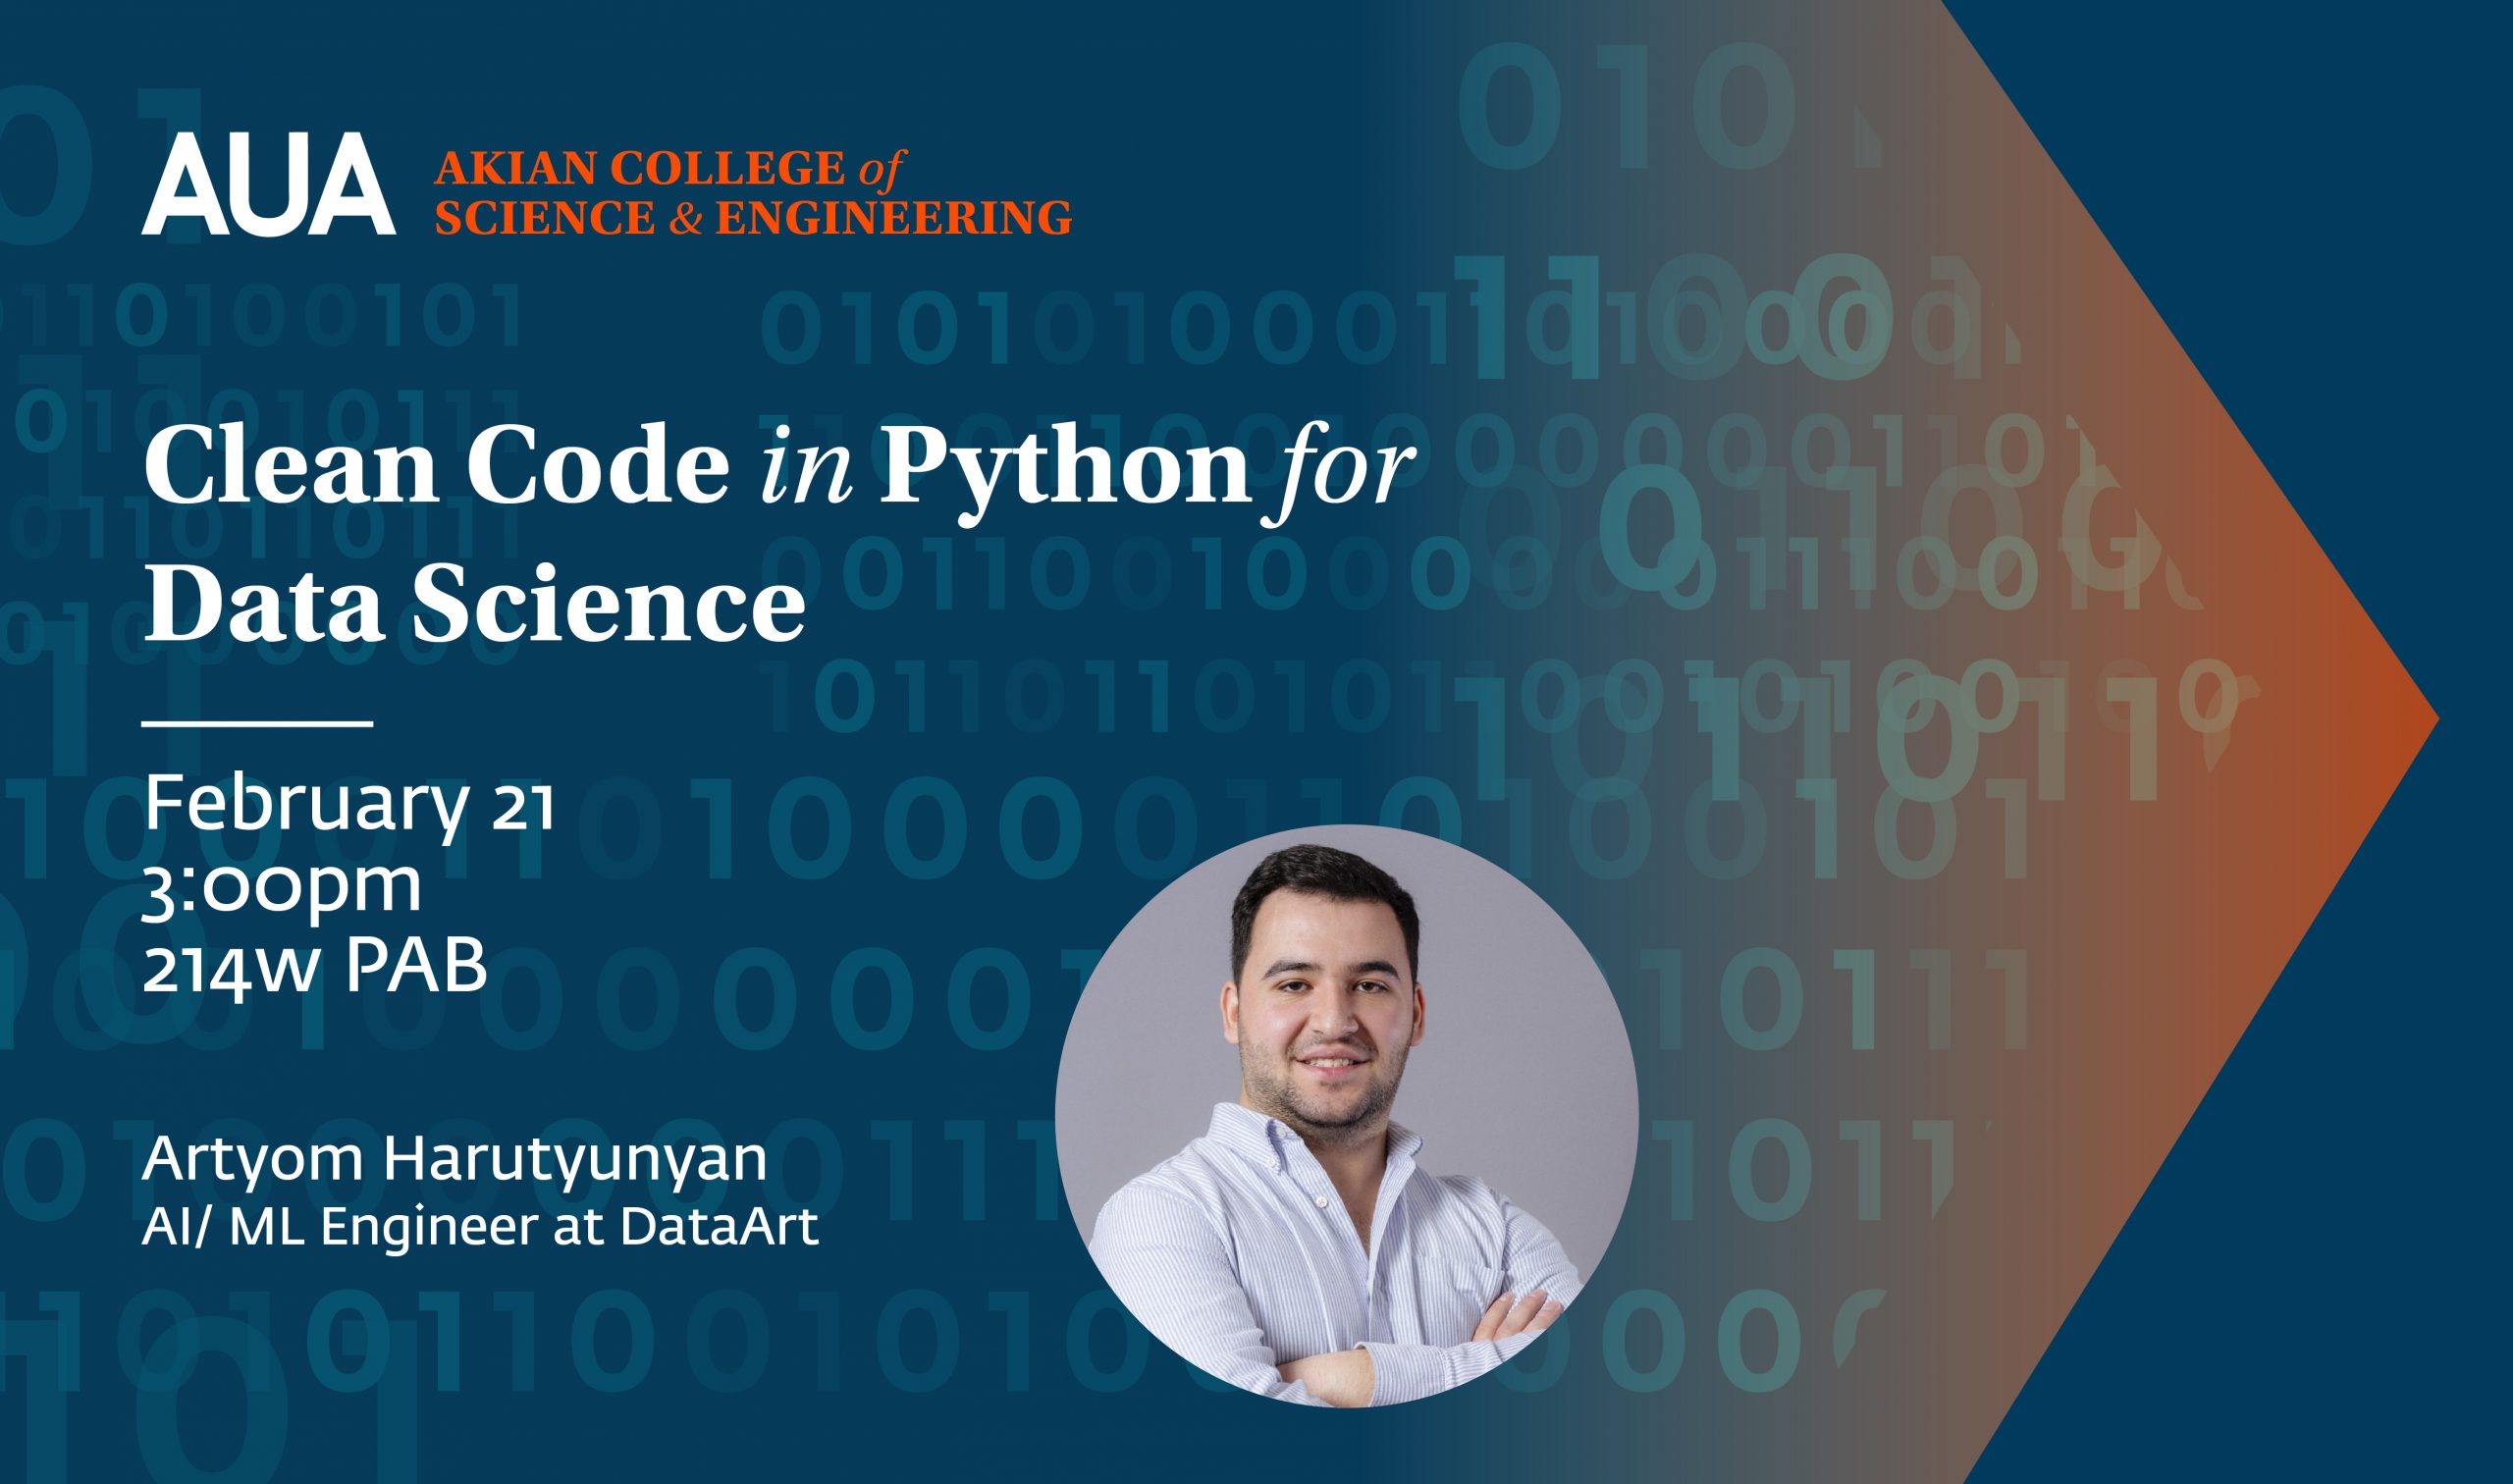 Clean Code in Python for Data Science